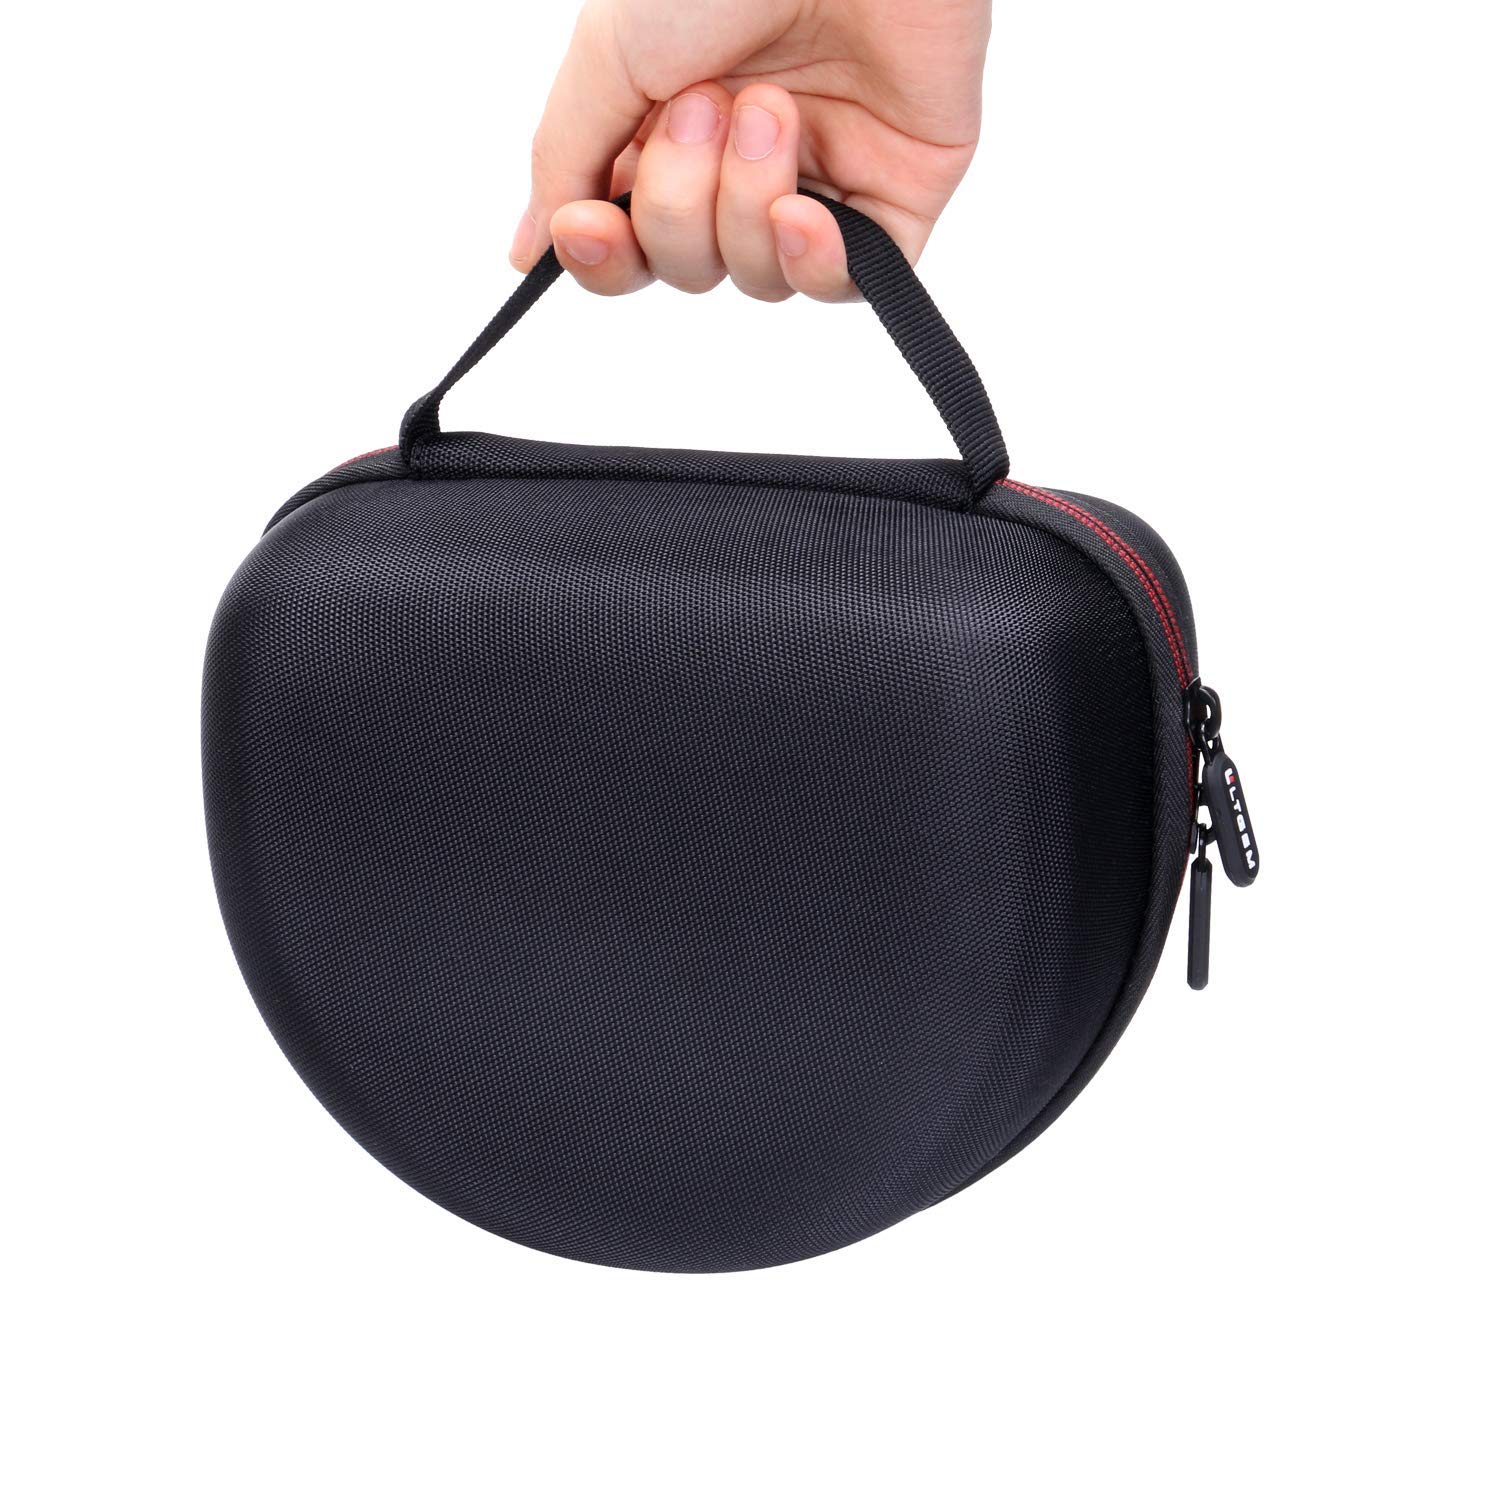 Portable headphone case Hard Shell Headset Carrying Case/Protective Travel Bag with Space for Cables, Charger and Accessories